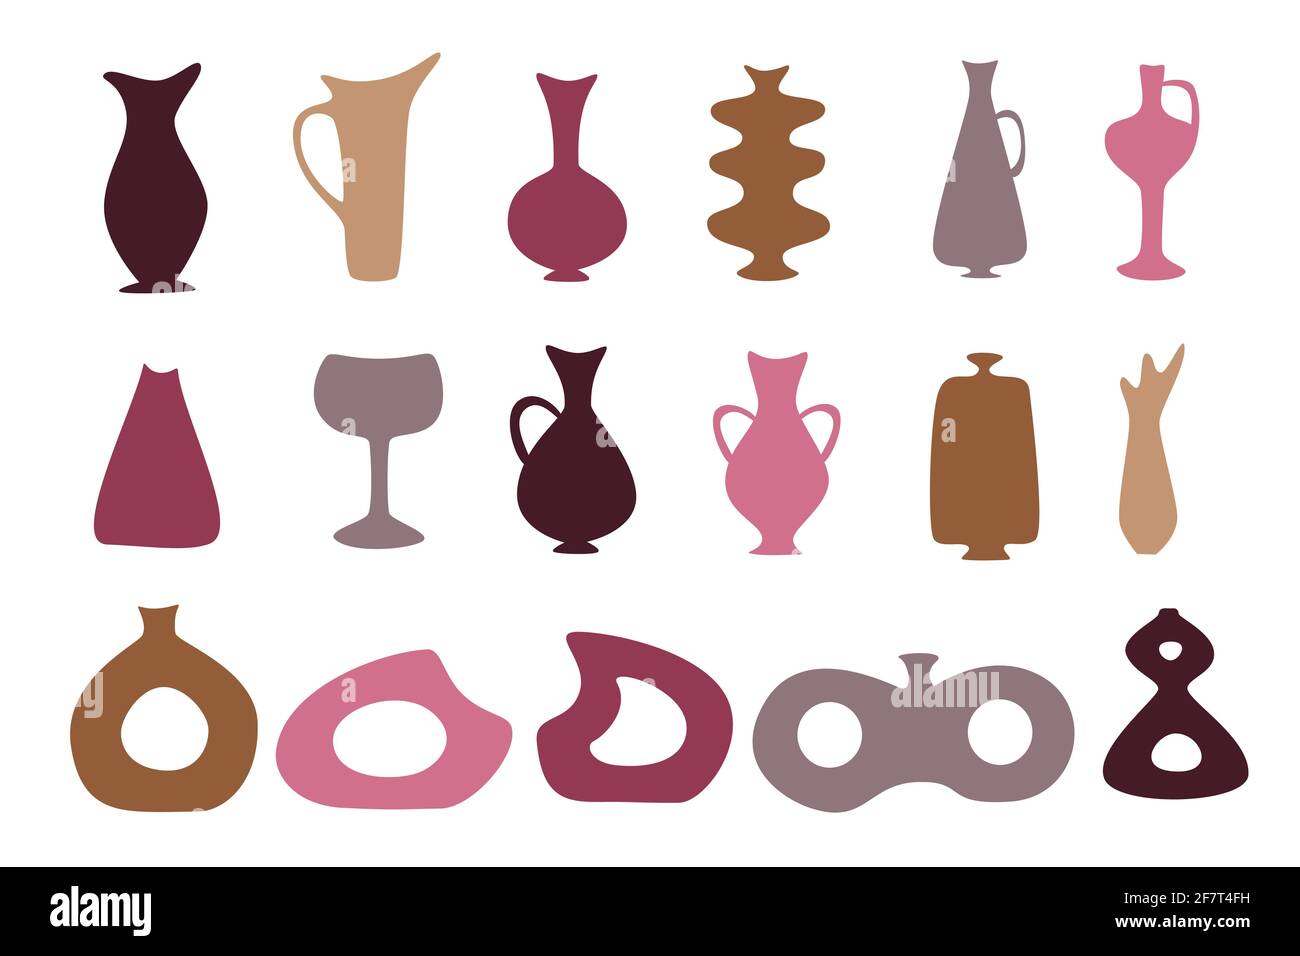 Set of color vases, bottles, urns and jars silhouettes for abstract design, simple hand drawn shapes vector illustration Stock Vector